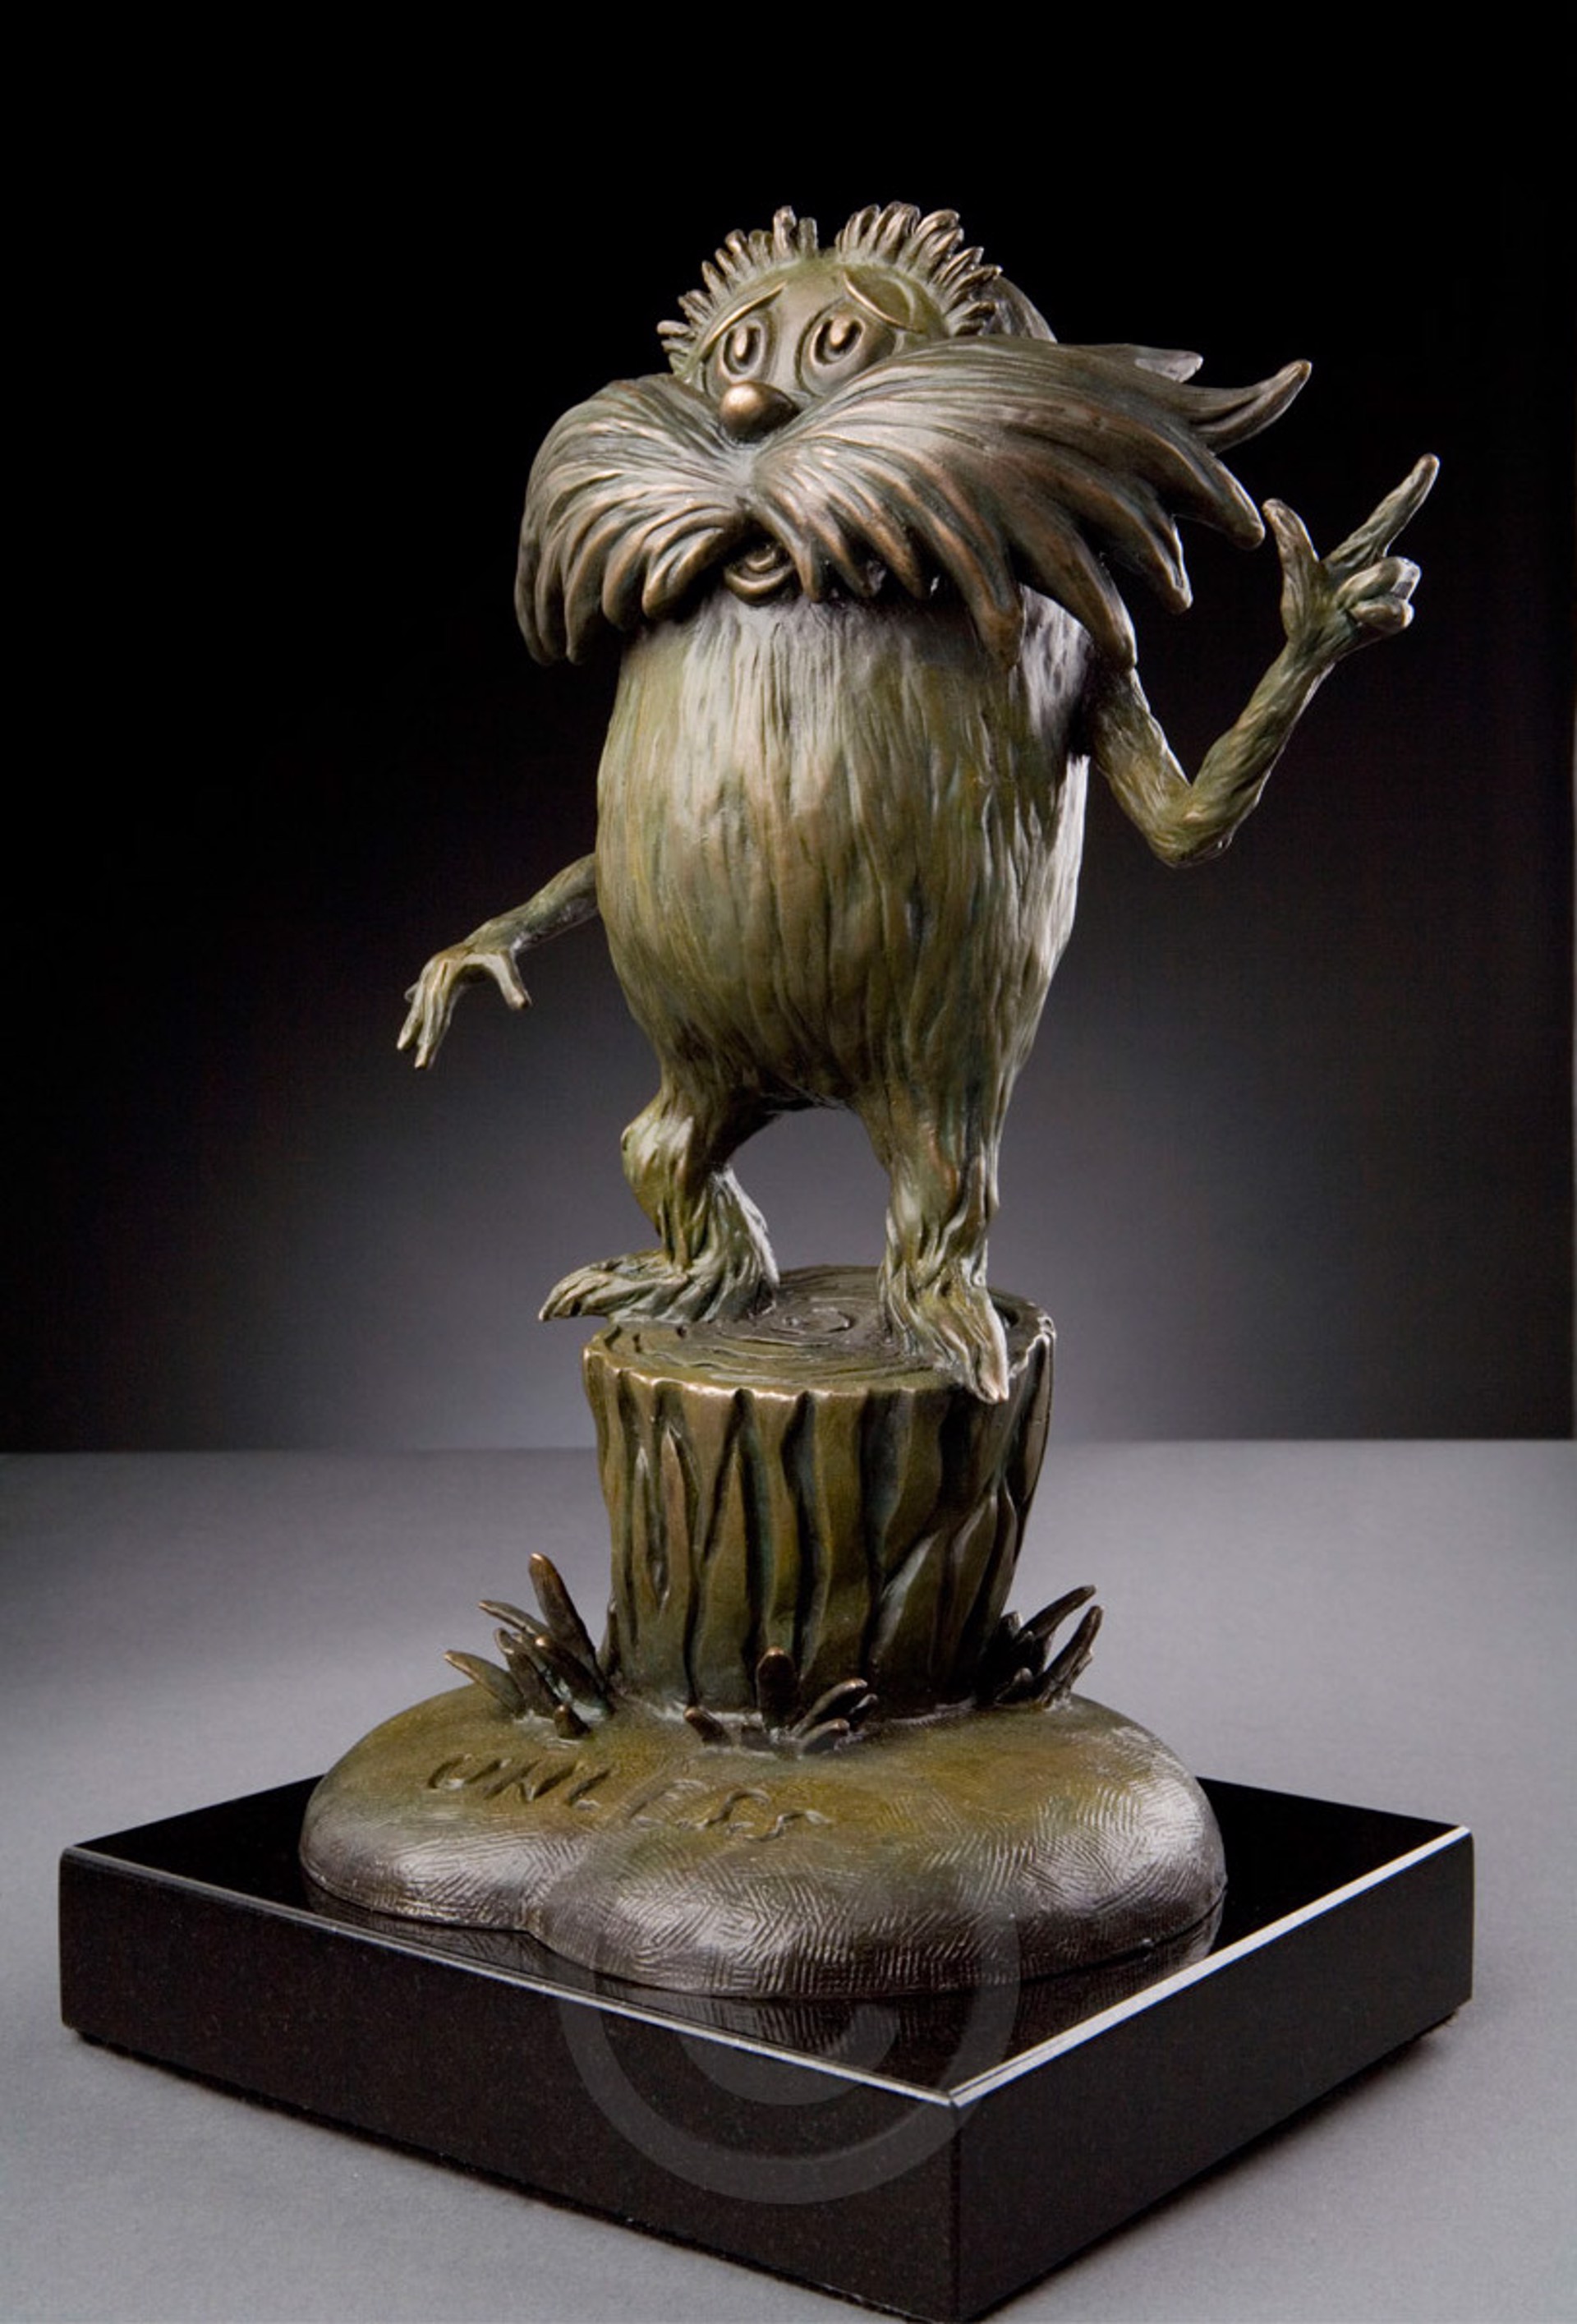 The Lorax (Maquette) by Dr. Seuss